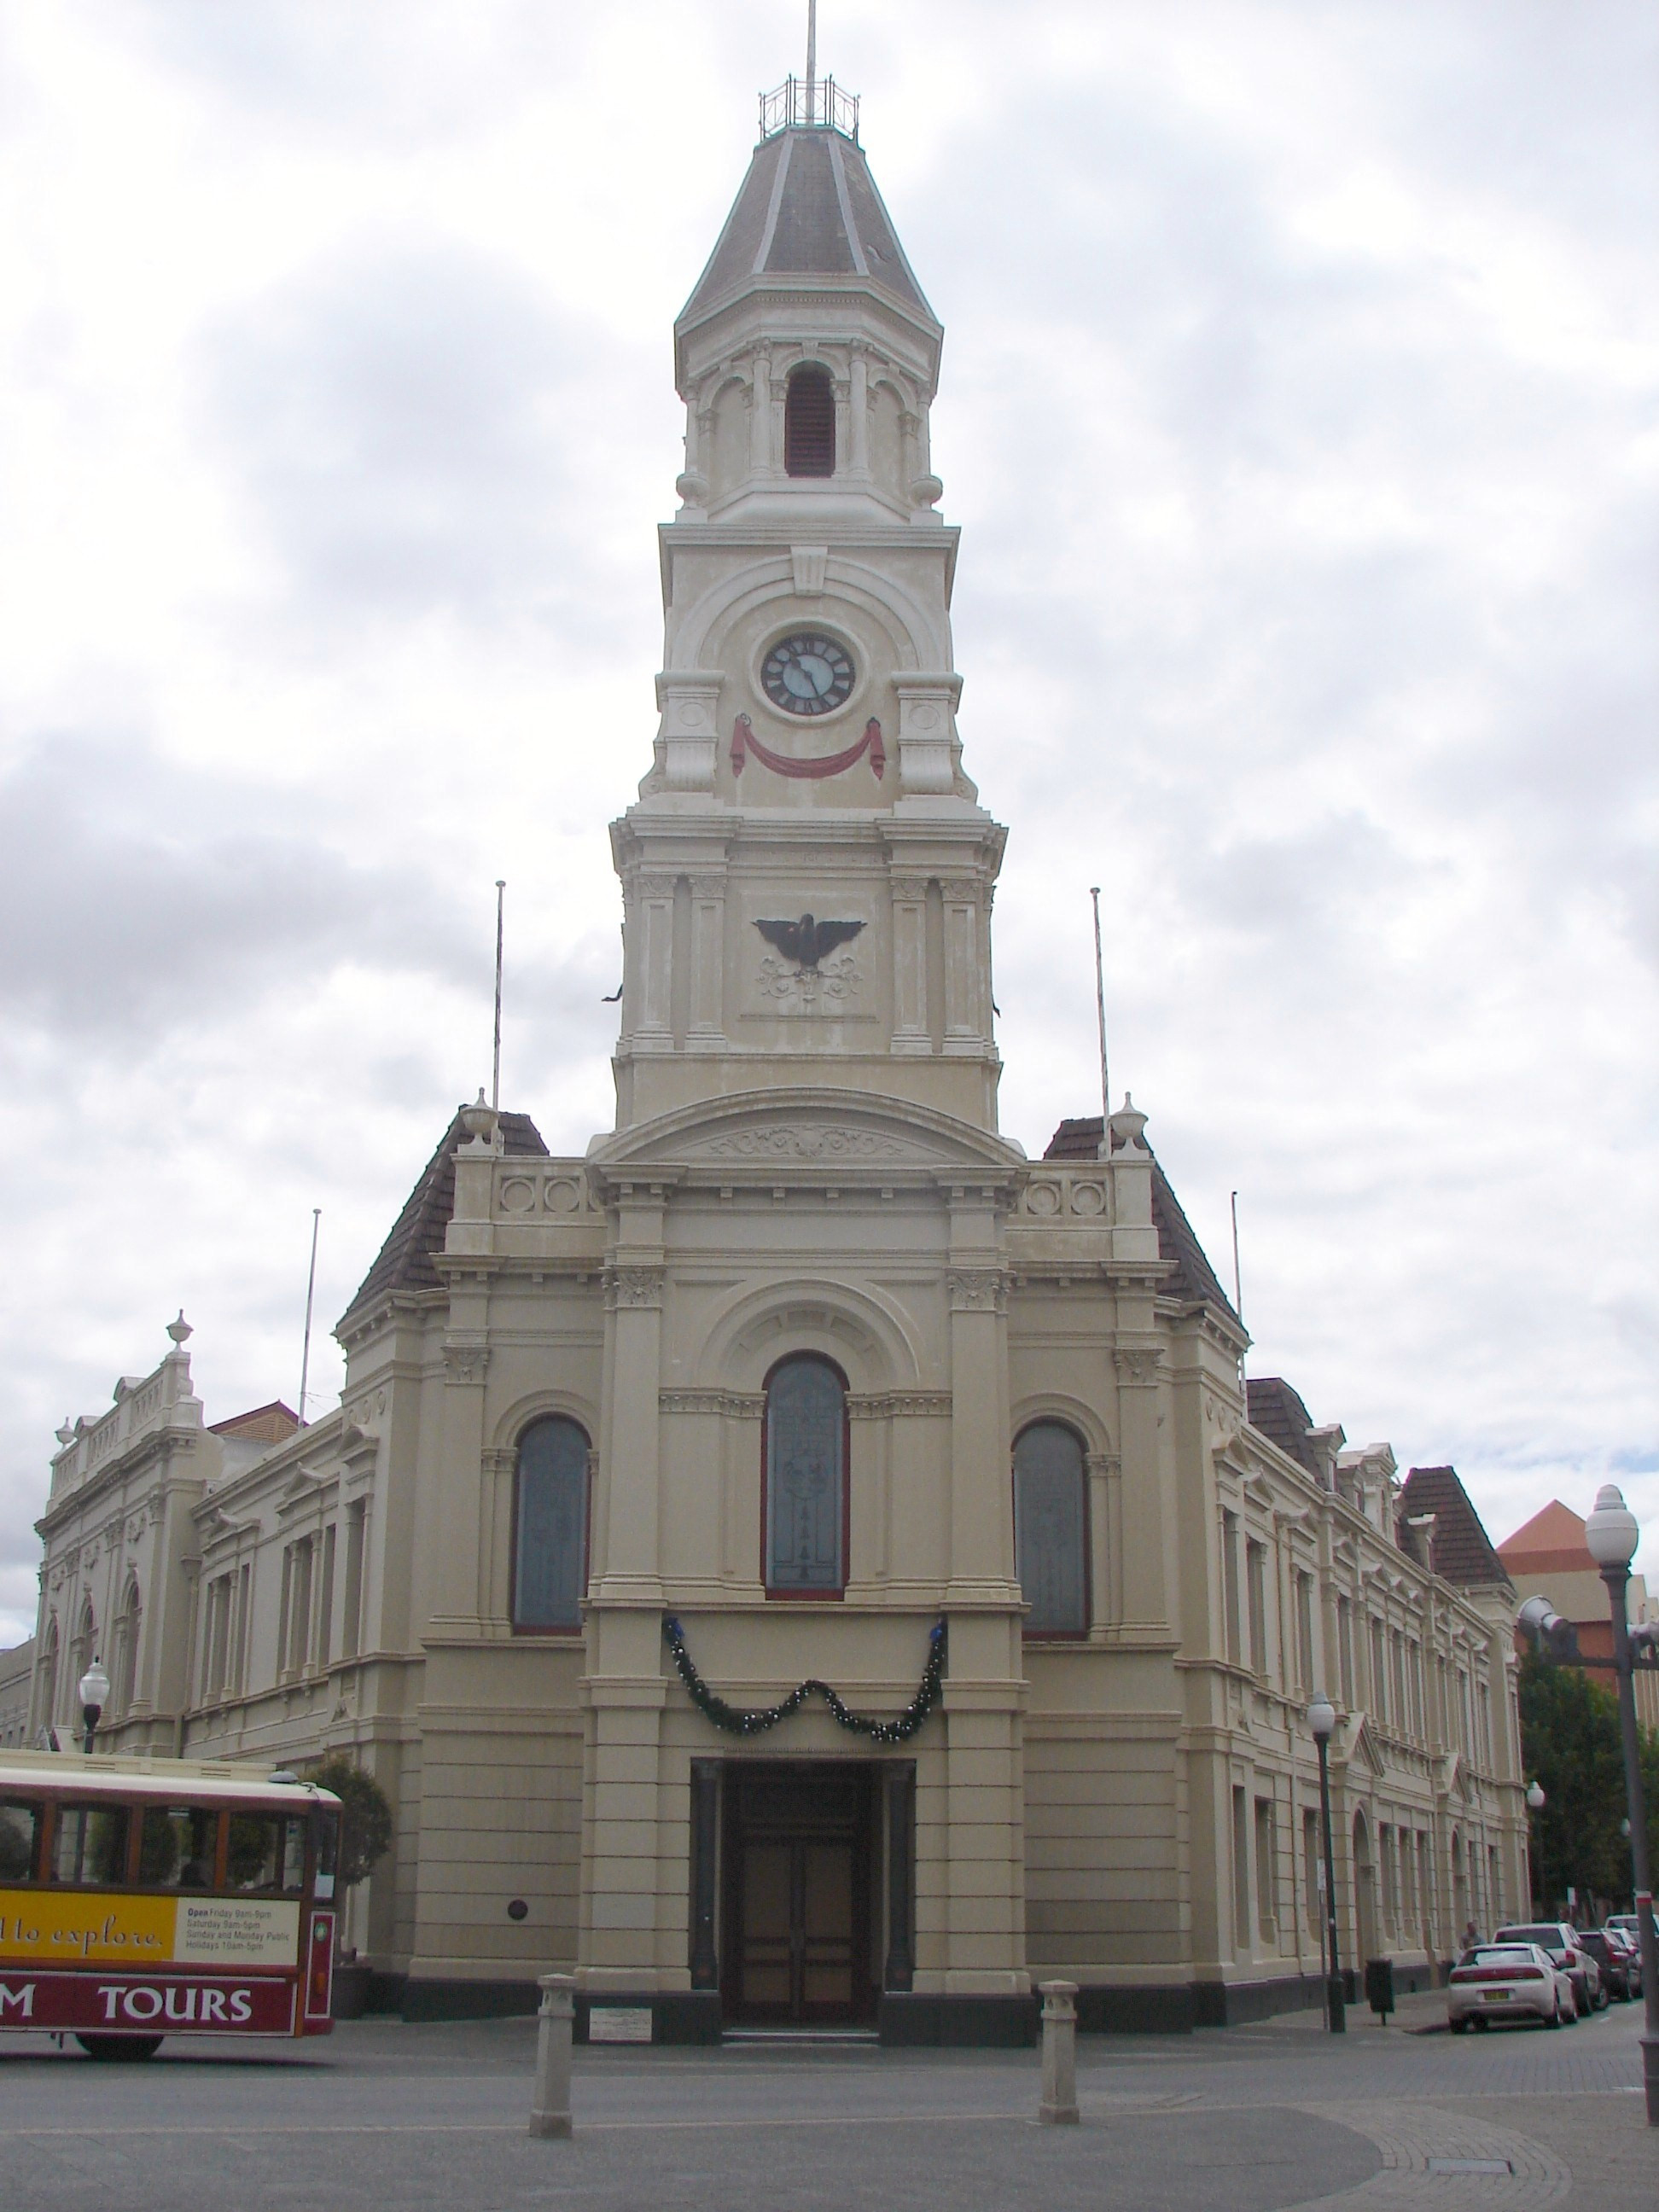 City of Fremantle Town Hall